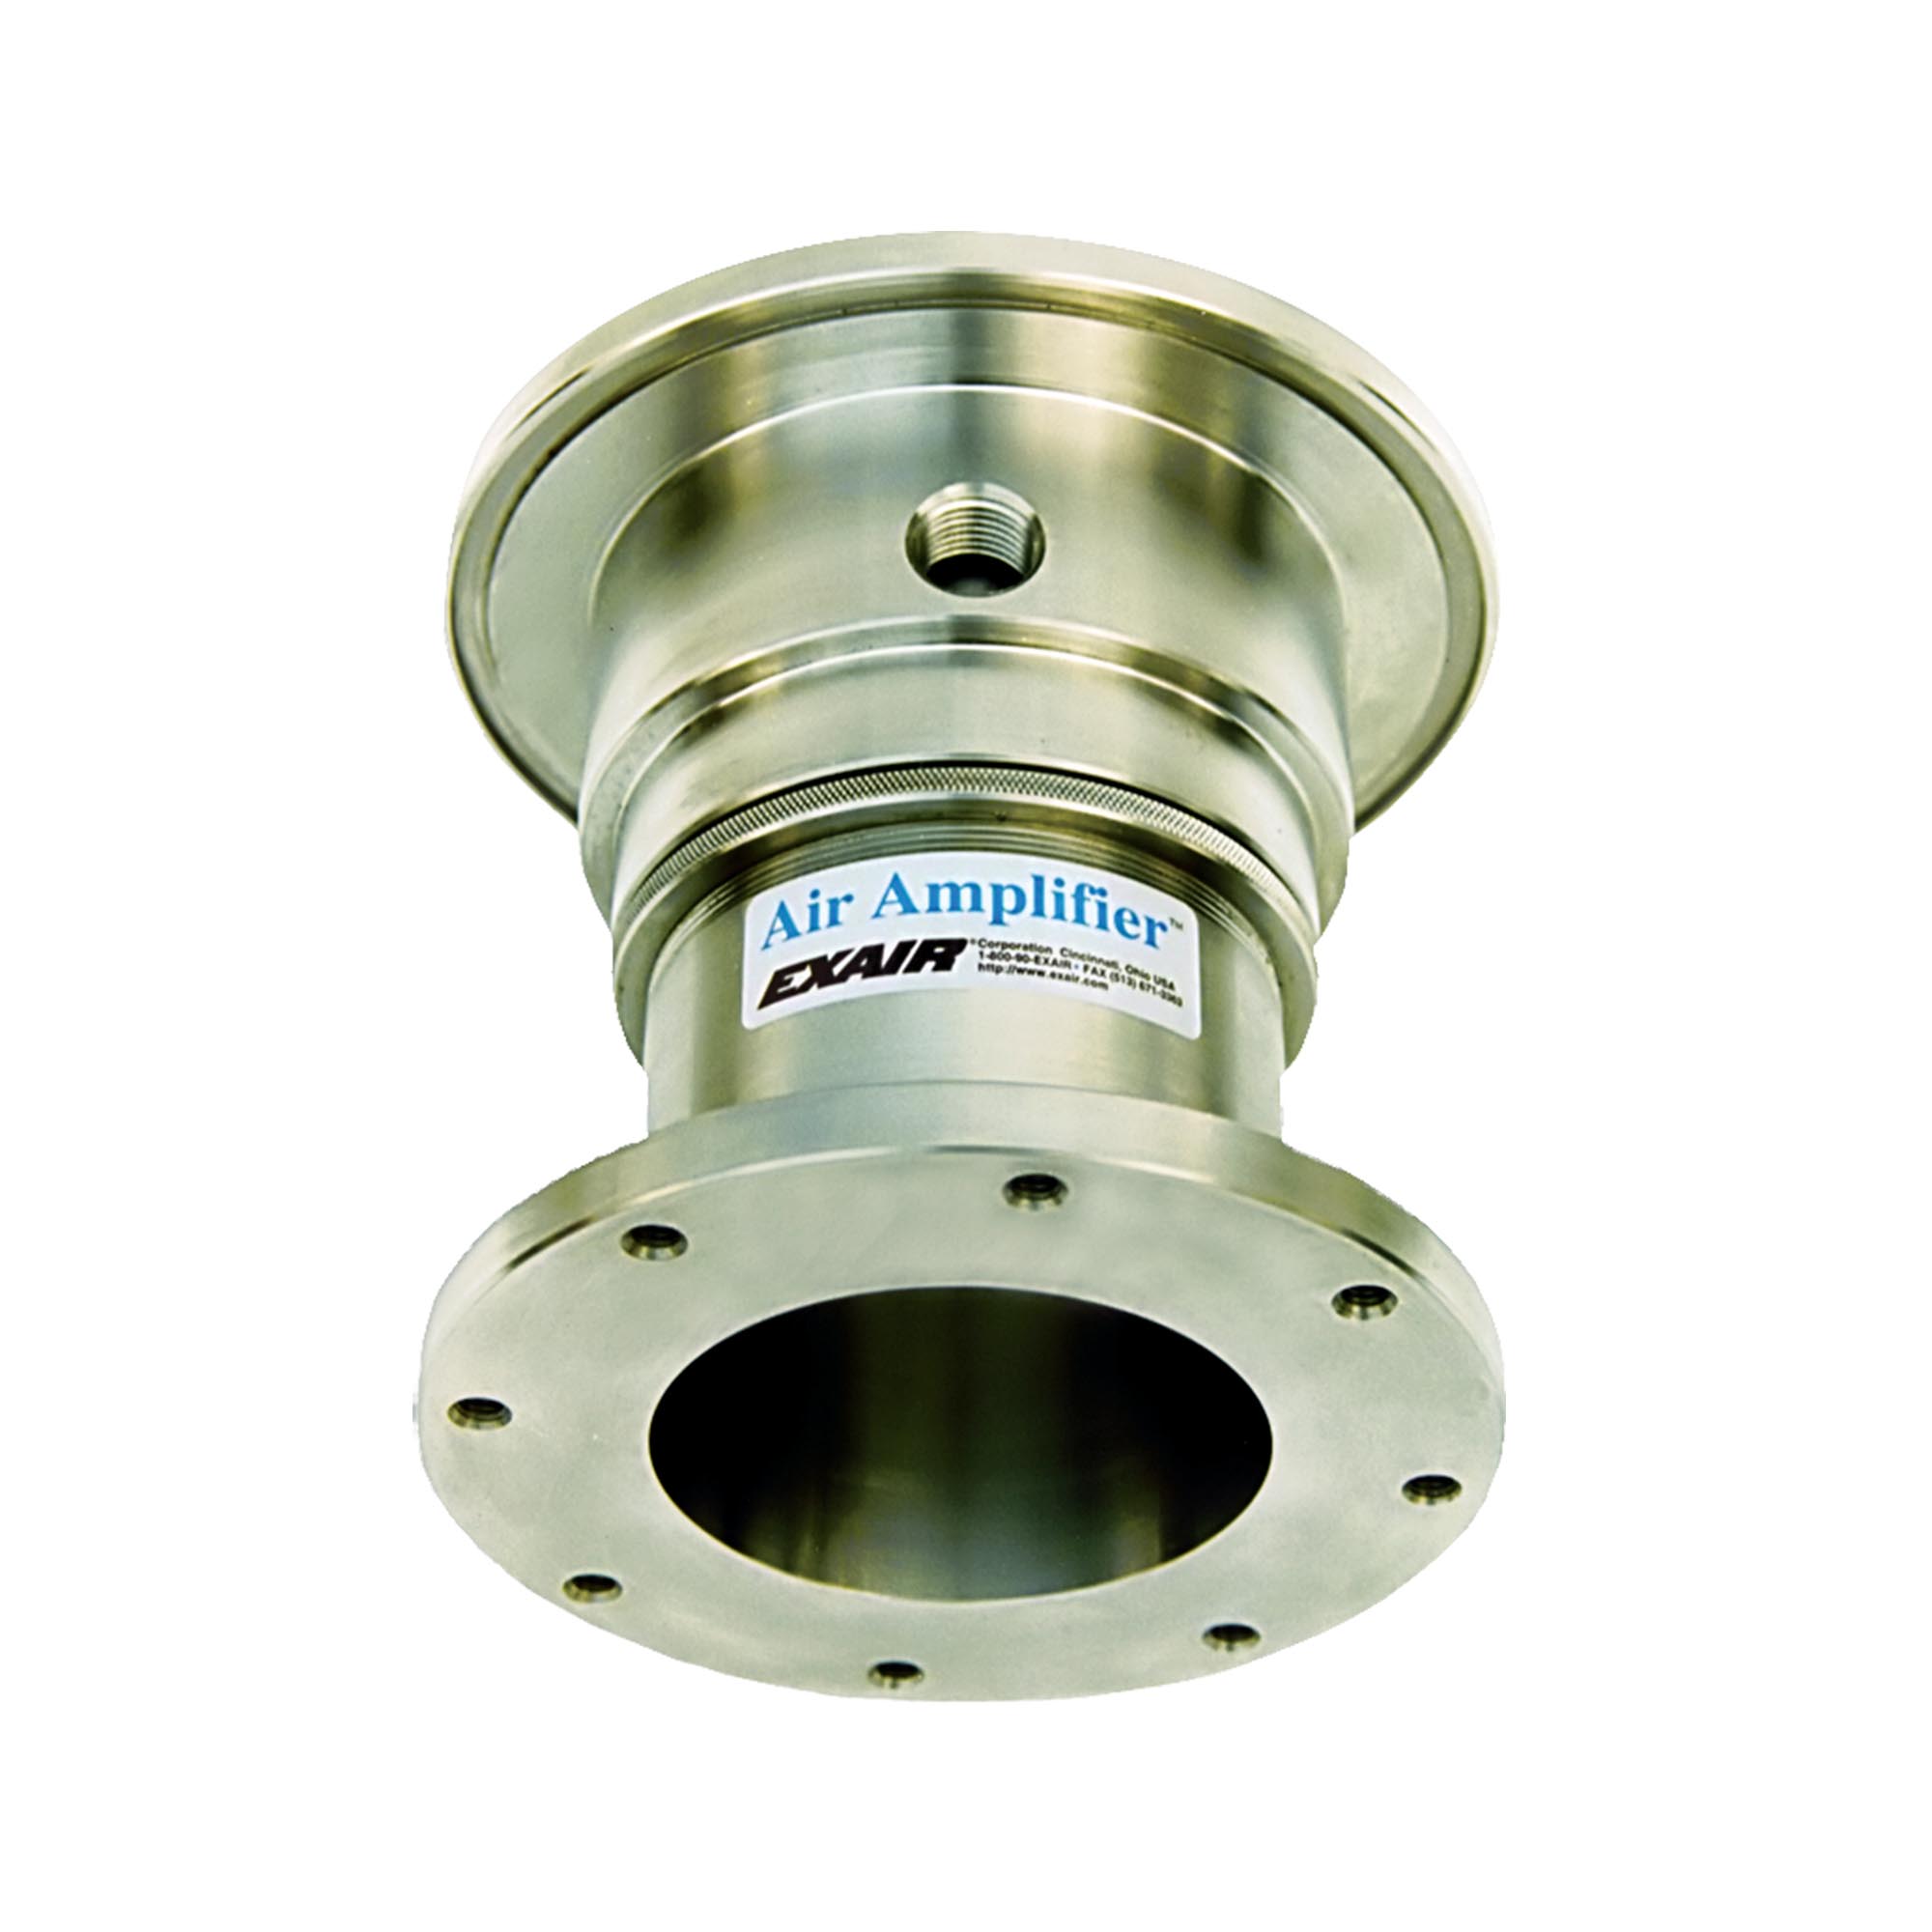 Special Flanged Air Amplifier